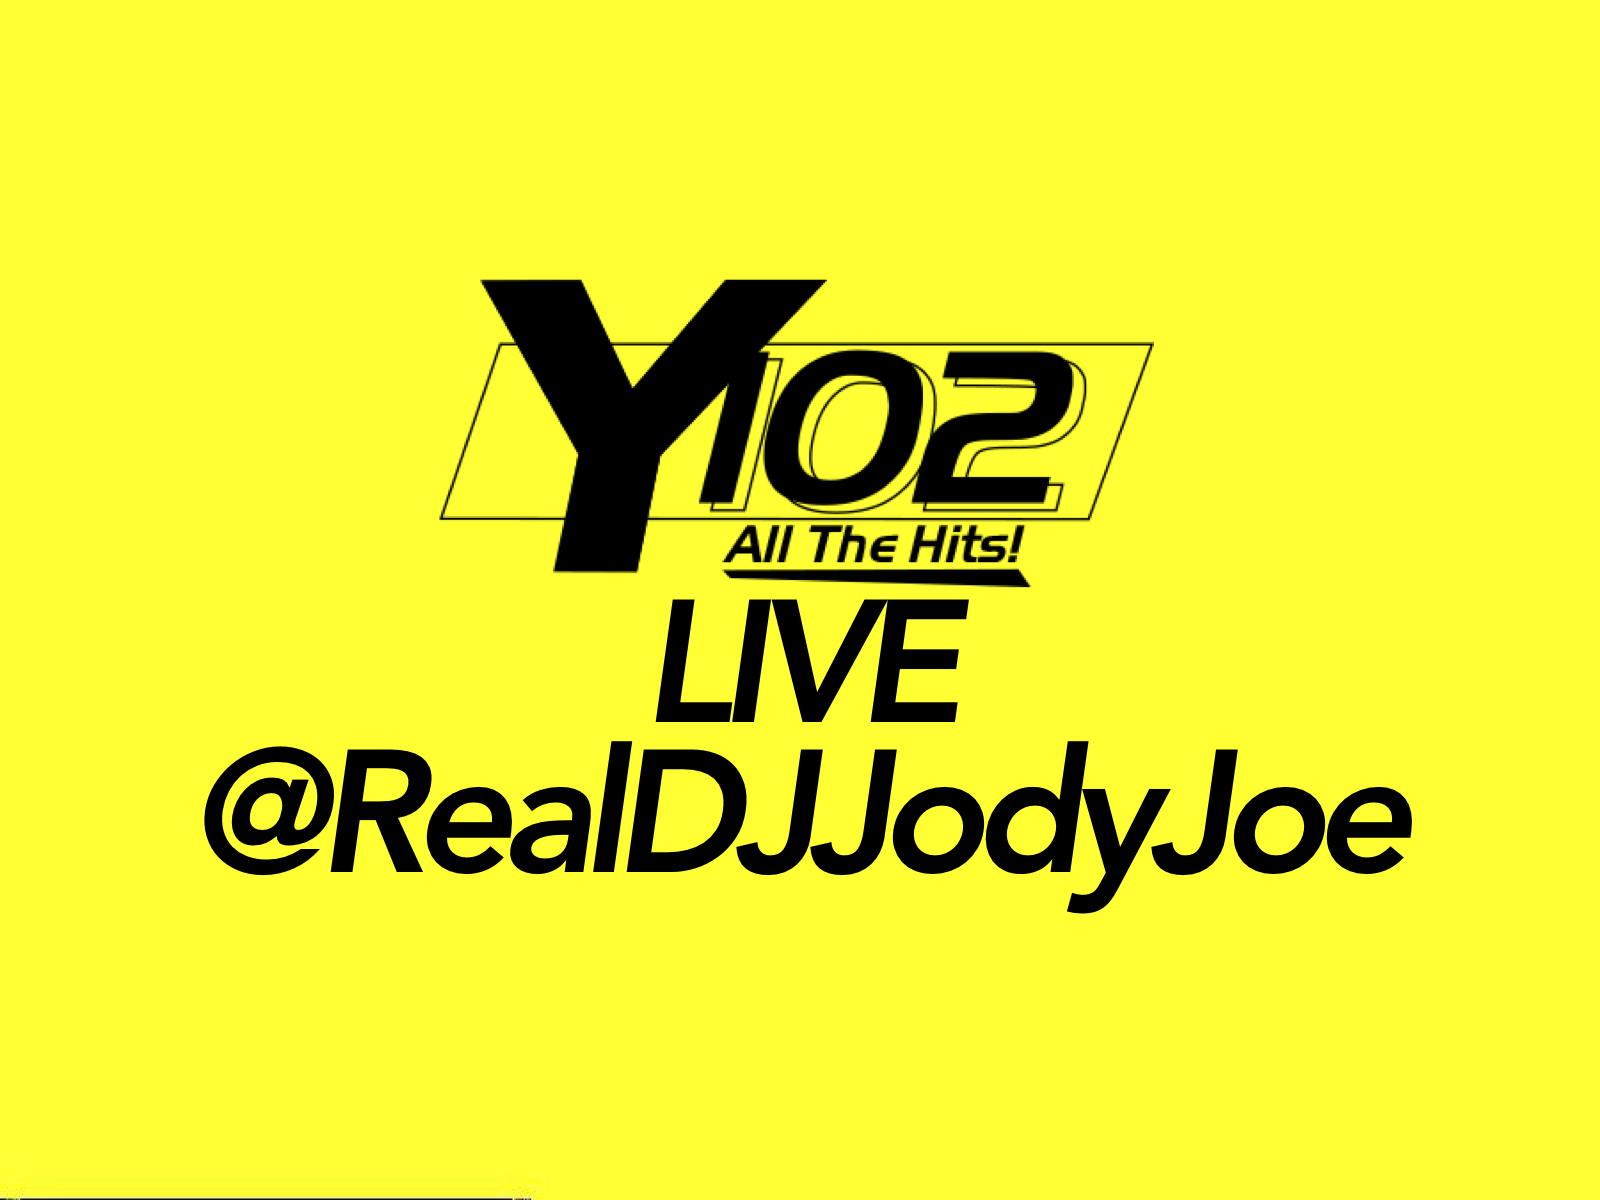 Y102 Live – All the Hits in the Mix @RealDJJodyJoe